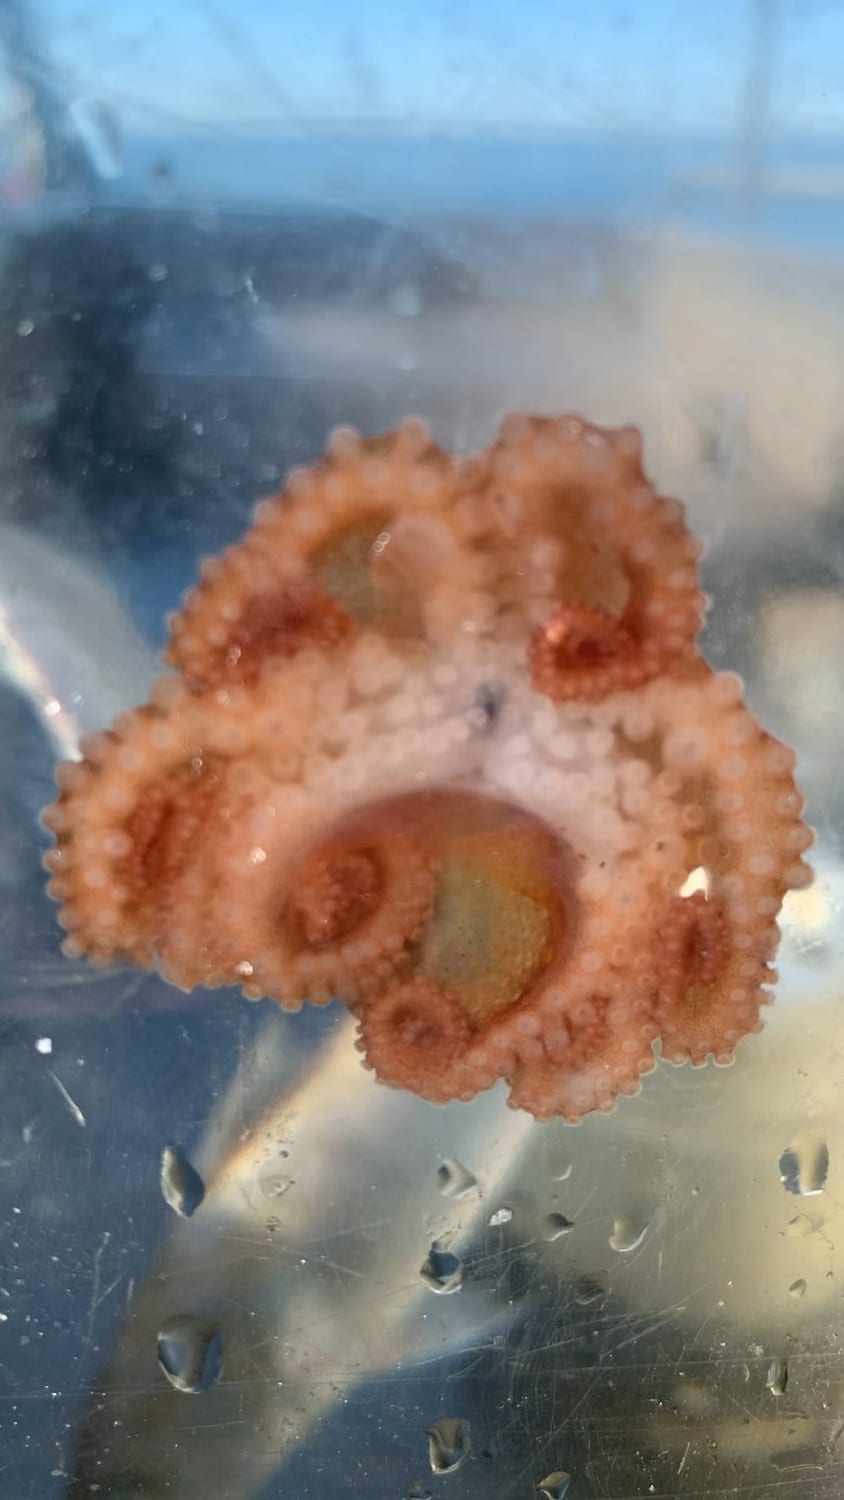 This cool video I took shows how octopus can move their hundreds of suction cups independently